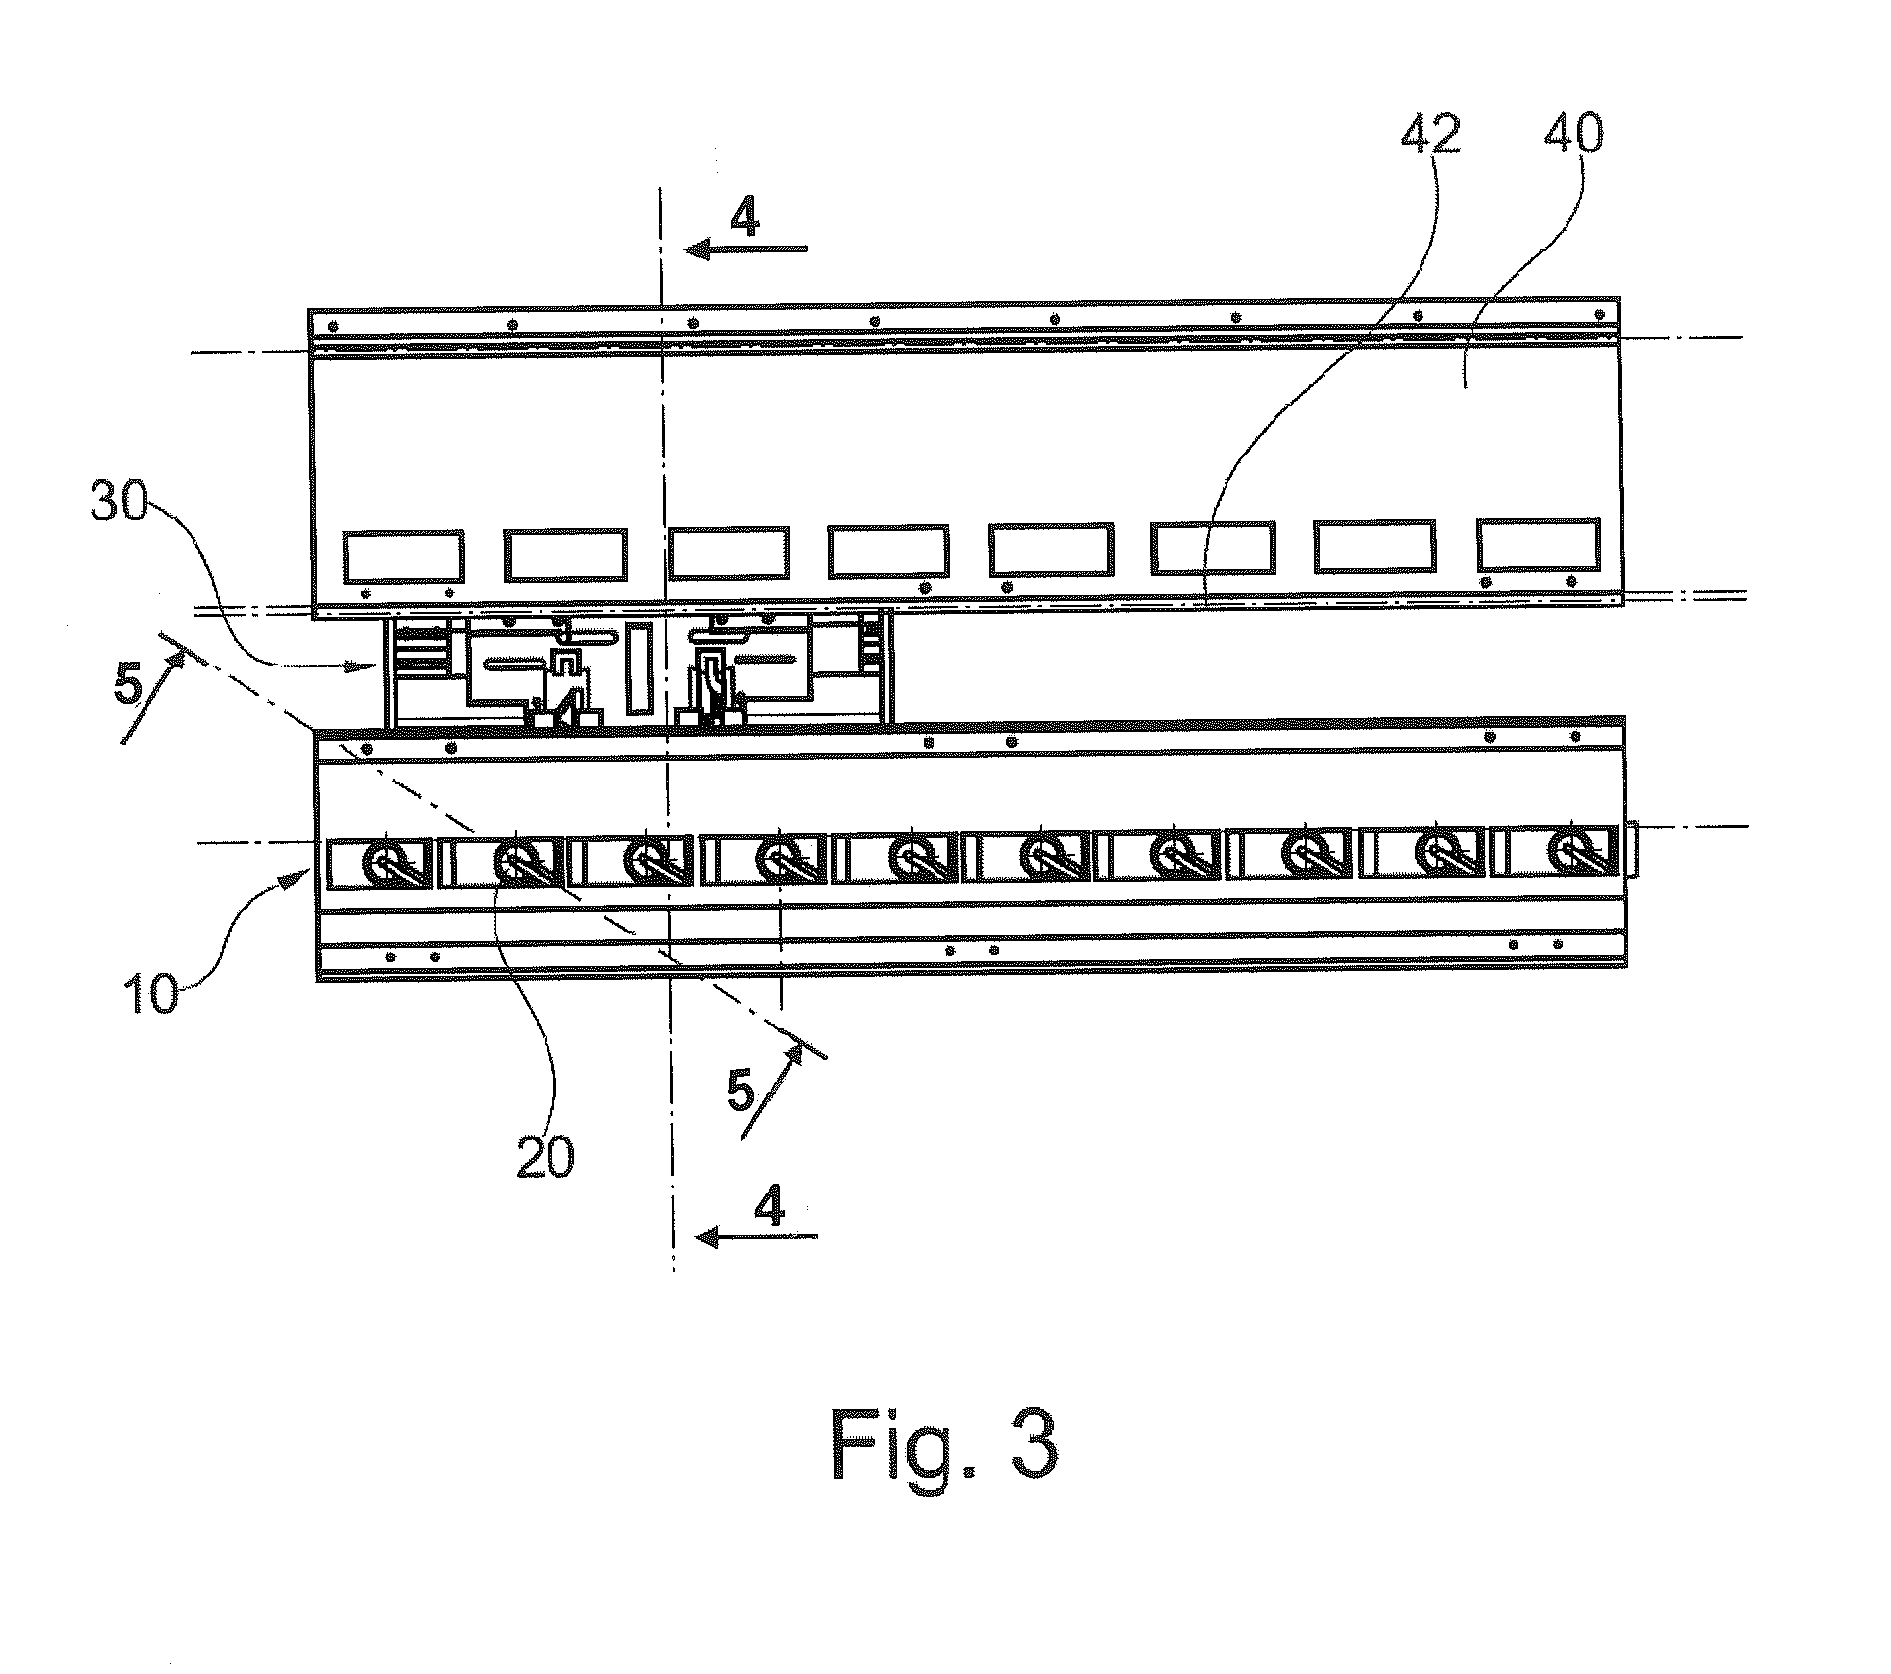 Air Transmission System for Flexible Passenger Supply Units